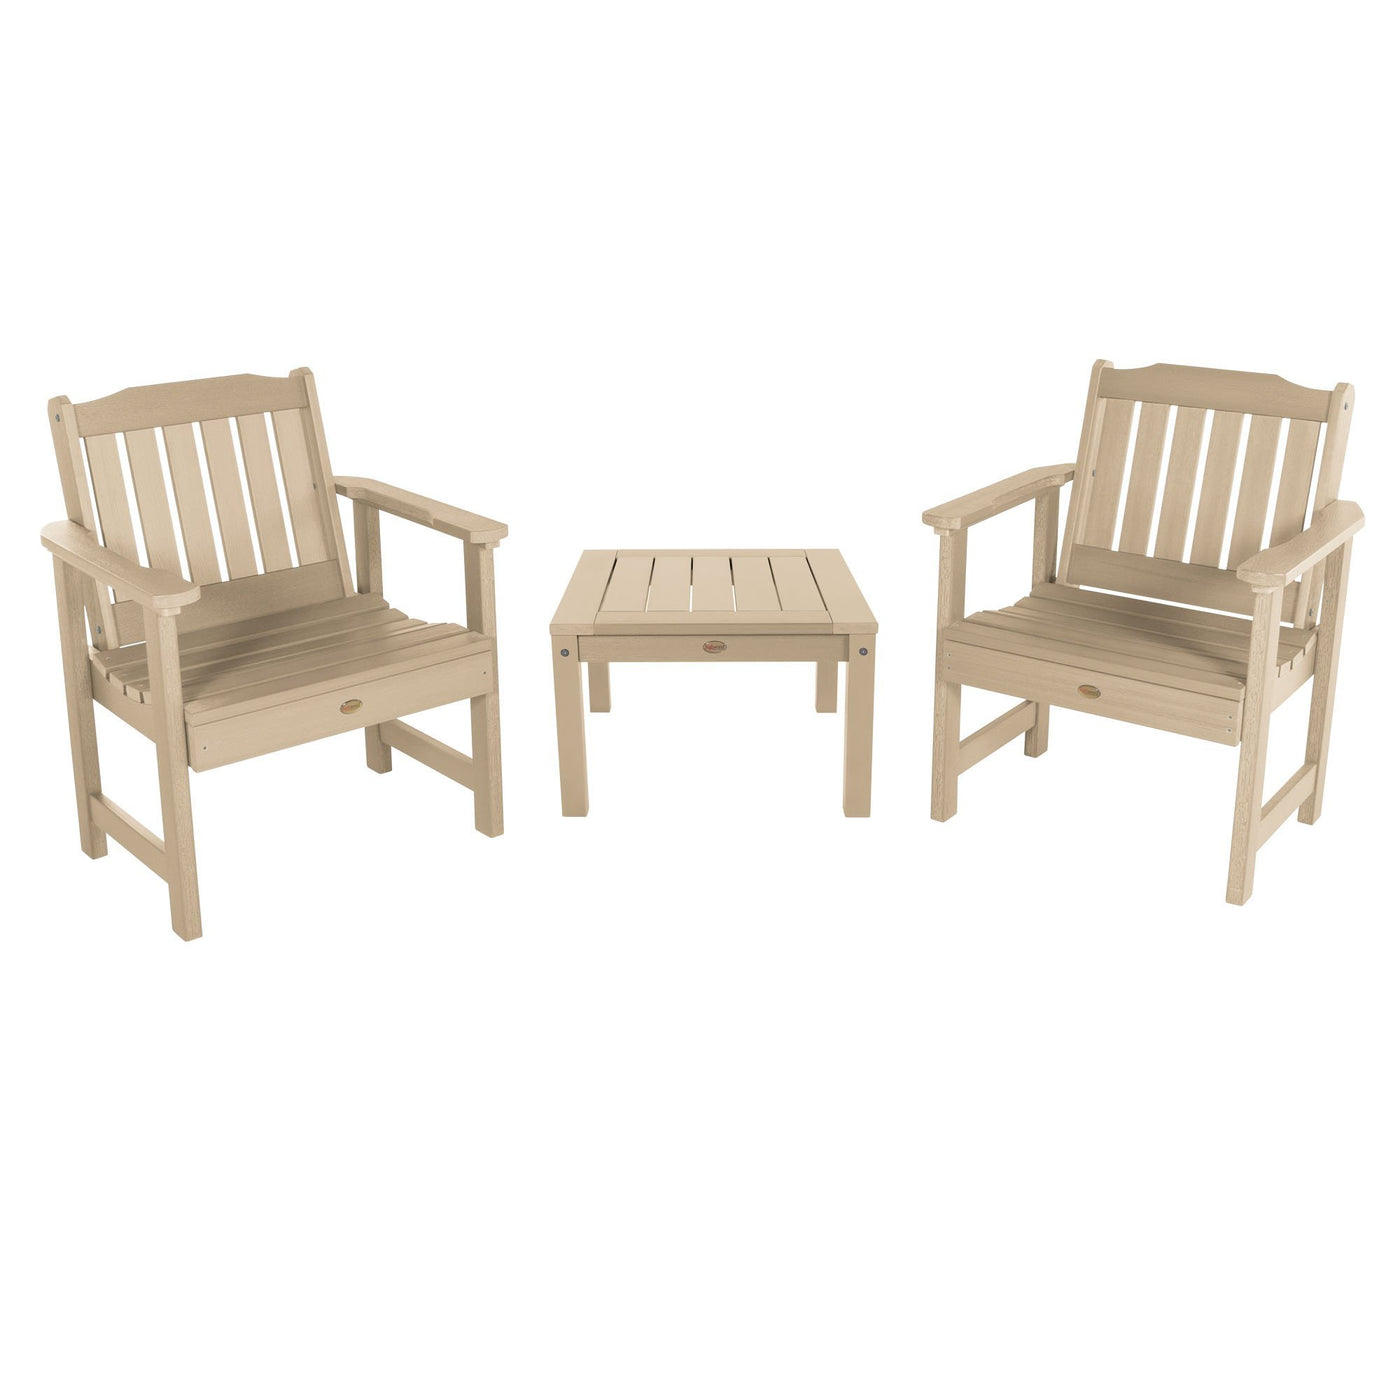 2 Lehigh Garden Chairs with 1 Square Side Table Highwood USA Tuscan Taupe 